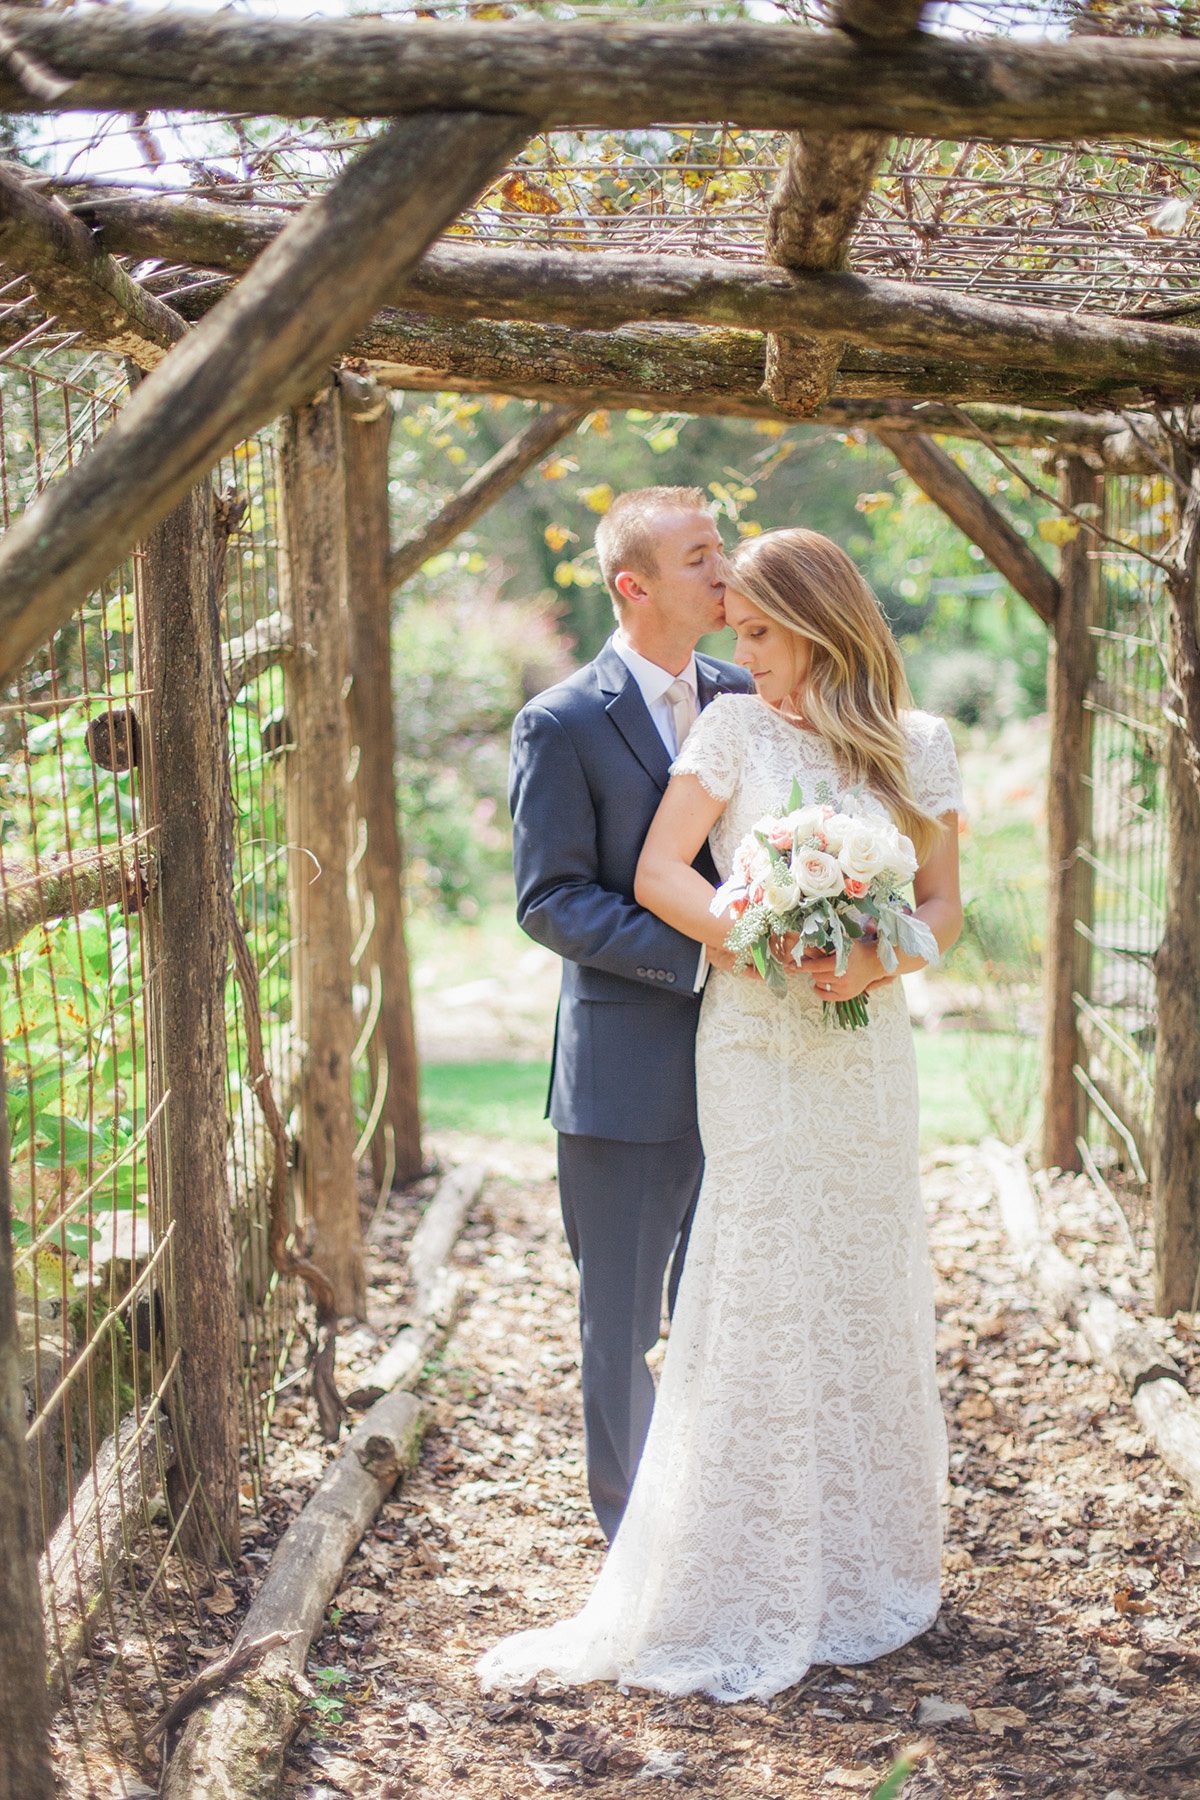 Bride and groom at Butterfly Hollow elopement wedding in Gordonsville, TN / Photography by Krista Lee